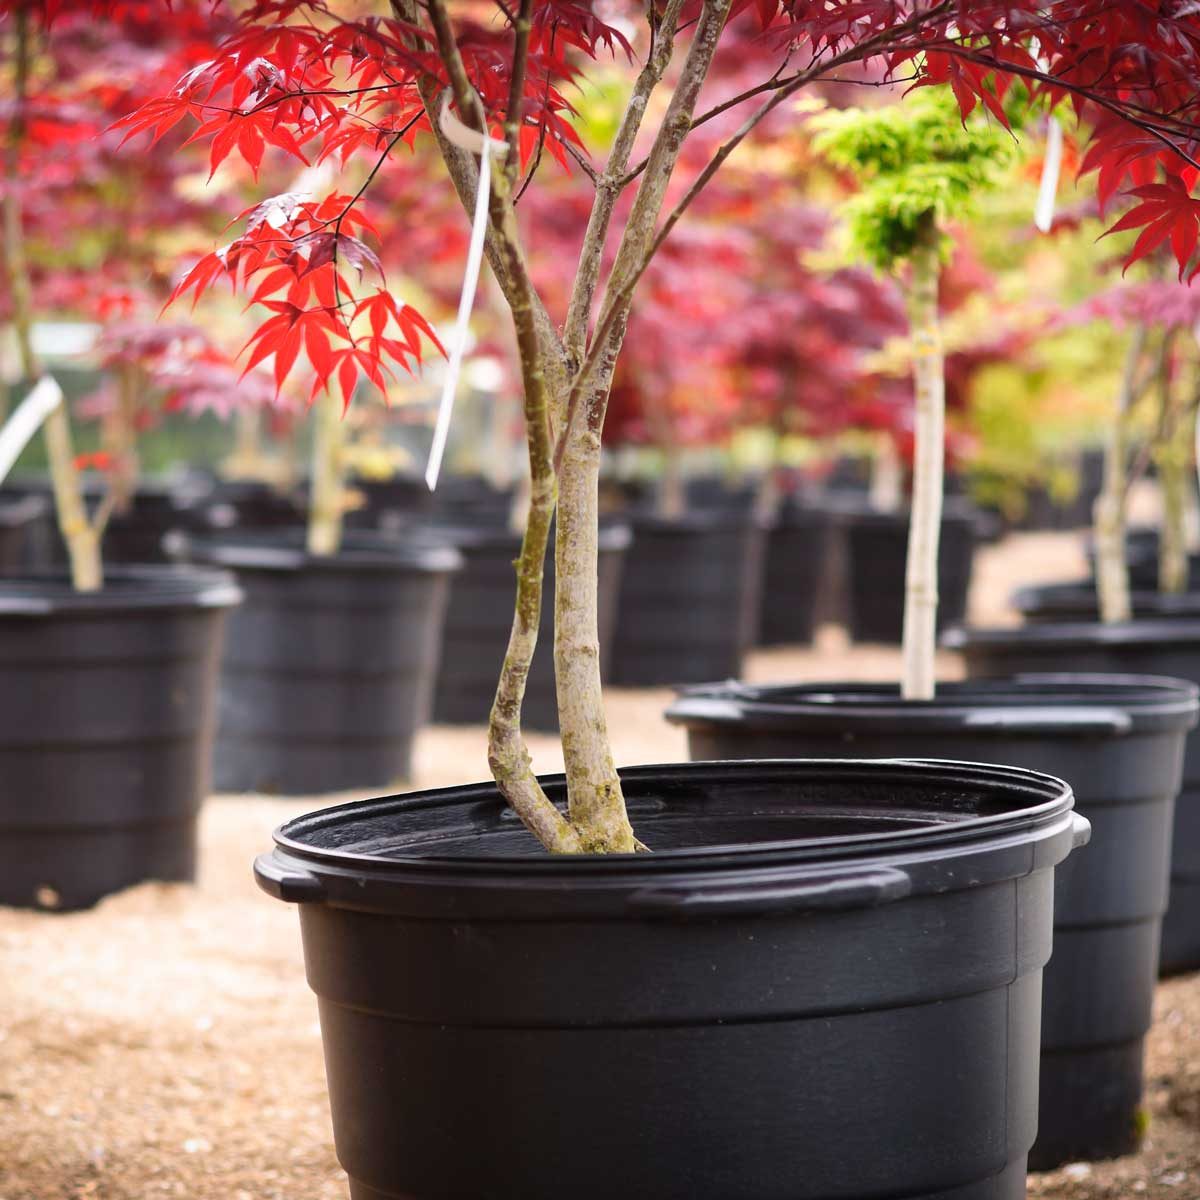 Japanese Maple Tree Care: Planting and Growing Tips